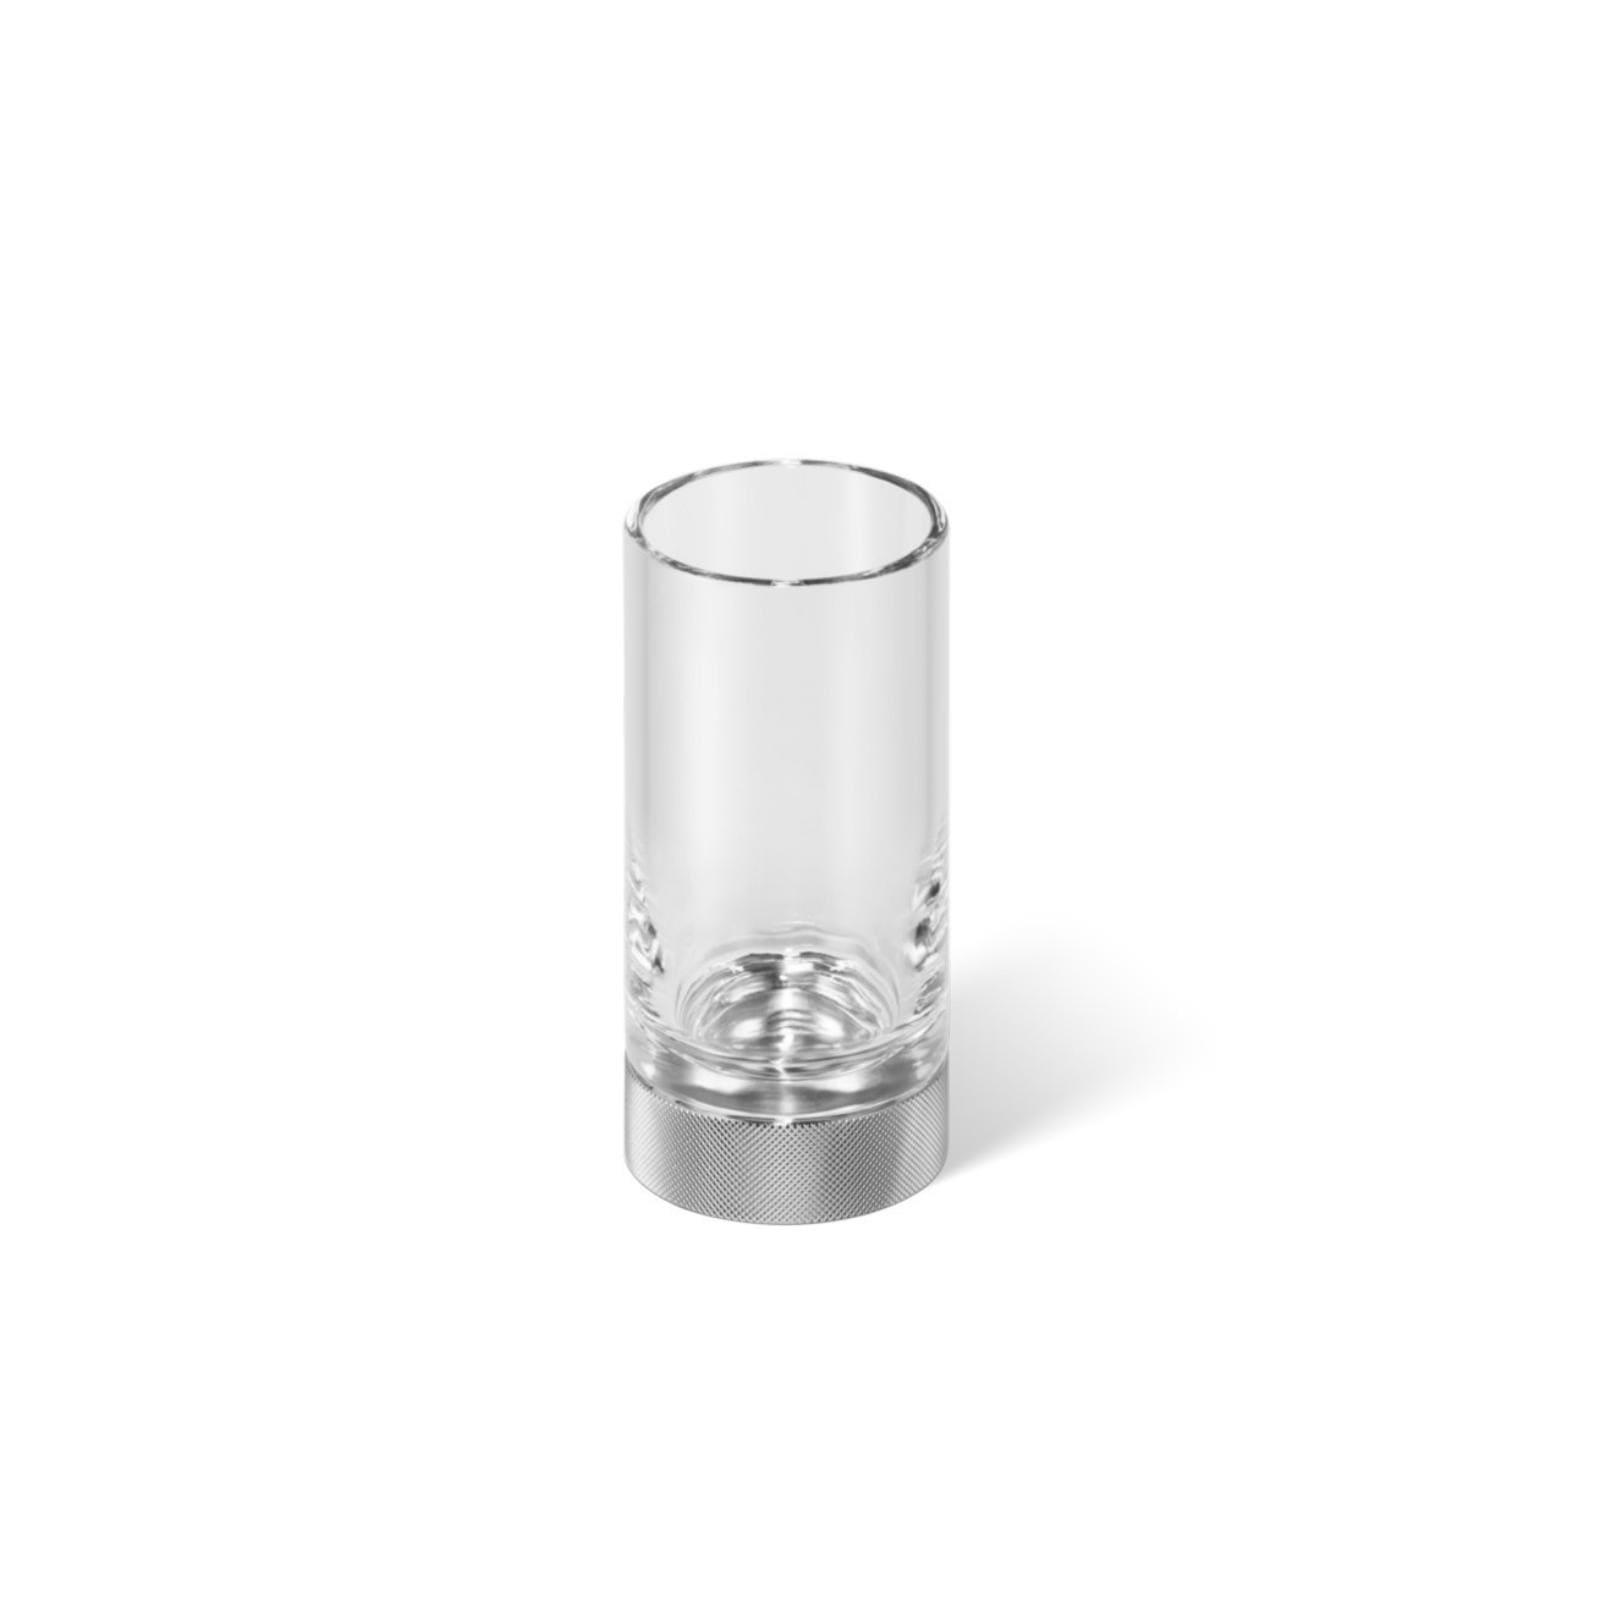 Tumbler chrome
with tumbler made of kristall clear Club Decor Walther